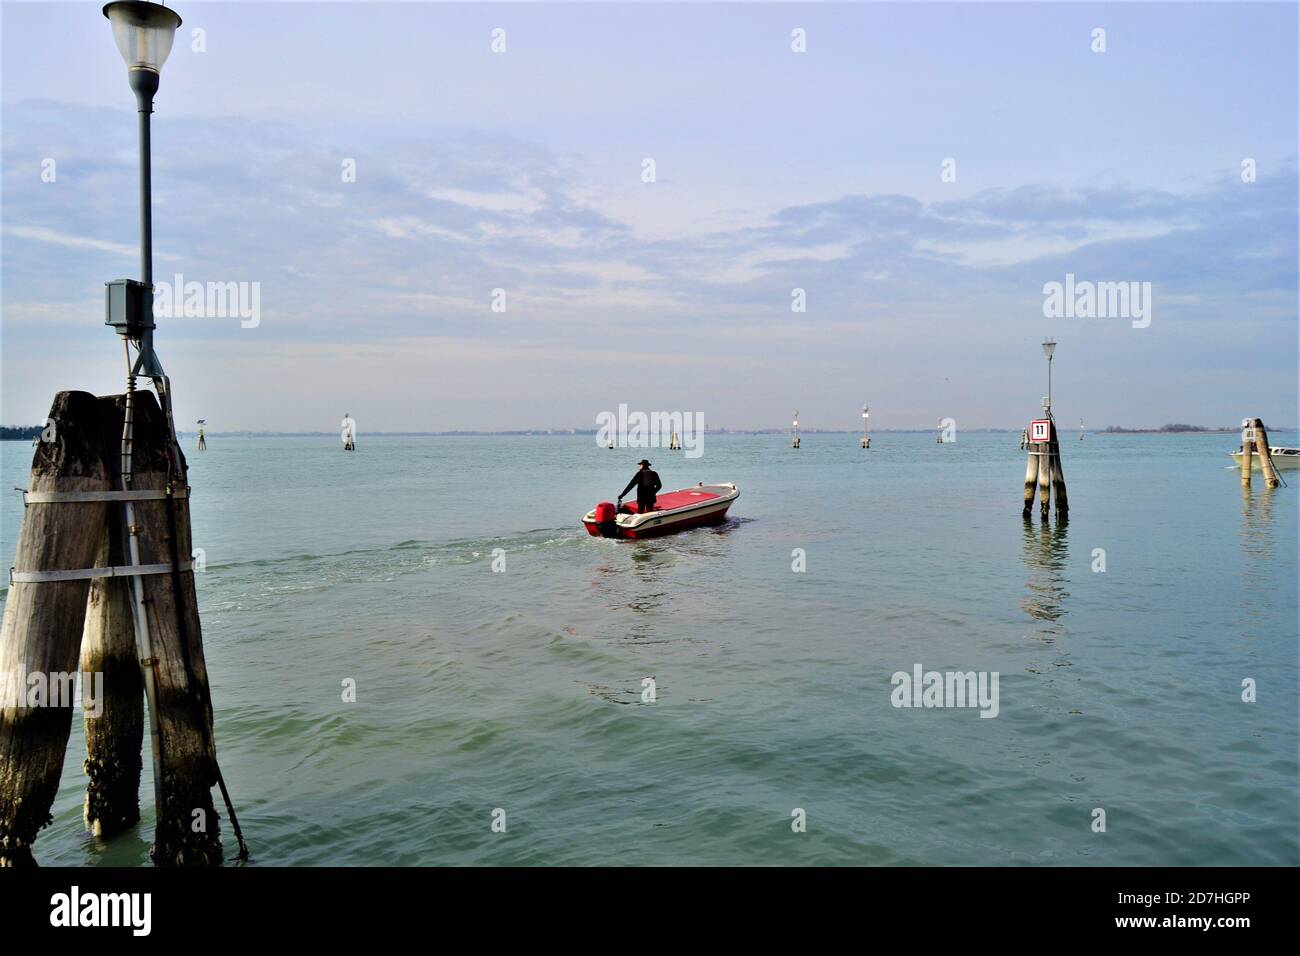 Man in the on the boat. City of gondolas: Venice (Venedig) and another point of view. Stock Photo